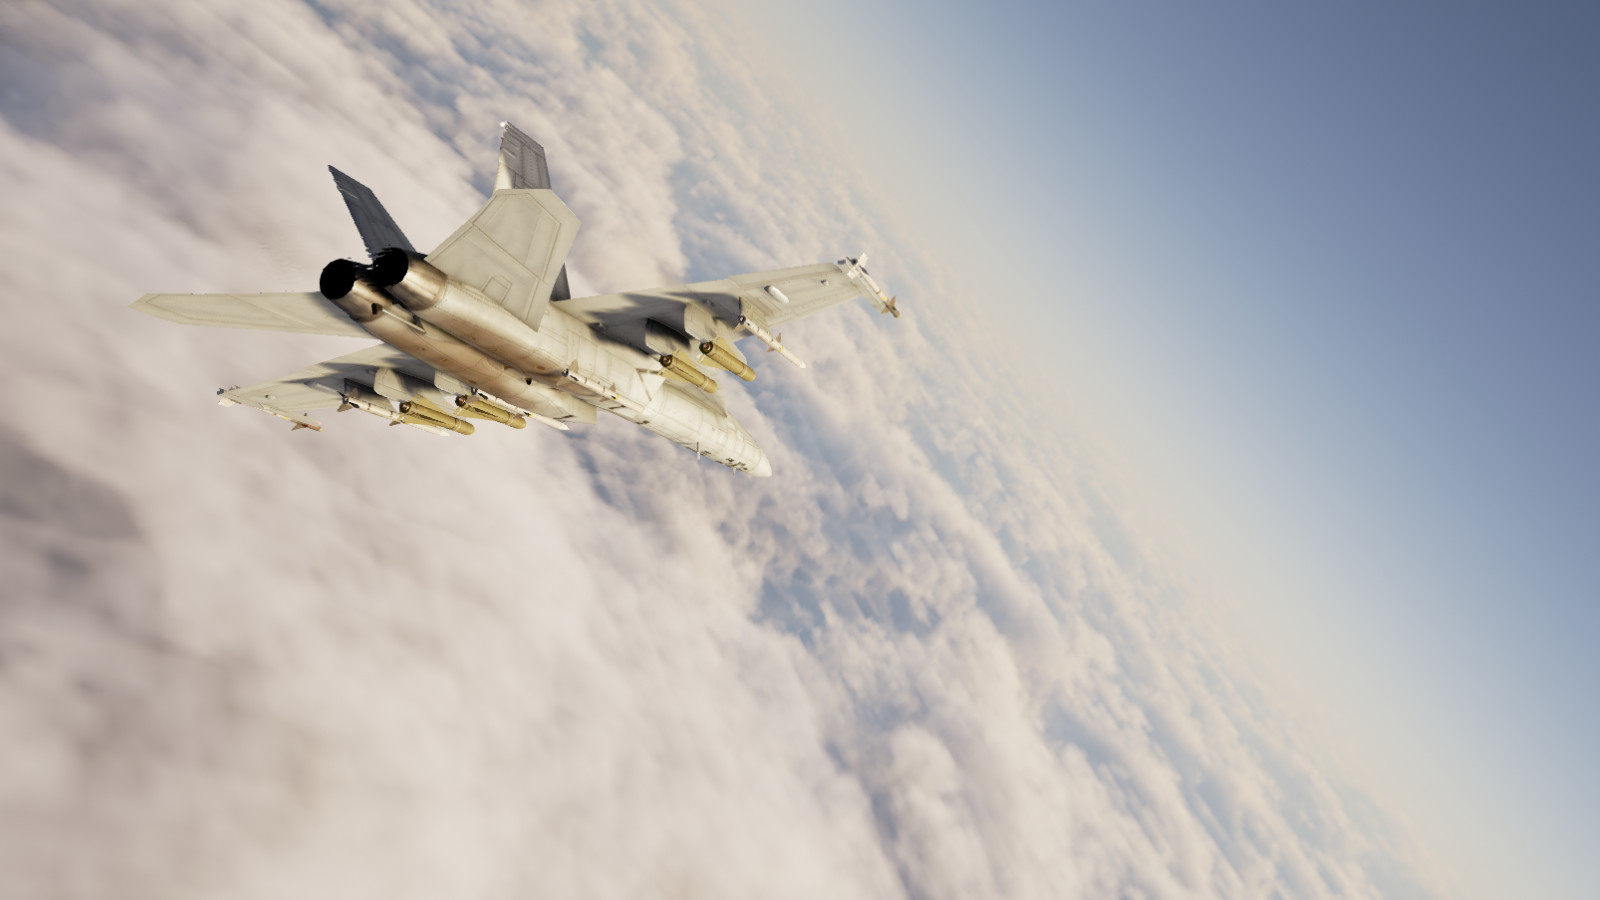 This One Man Indie Game Is A Gorgeous Tribute To Ace Combat